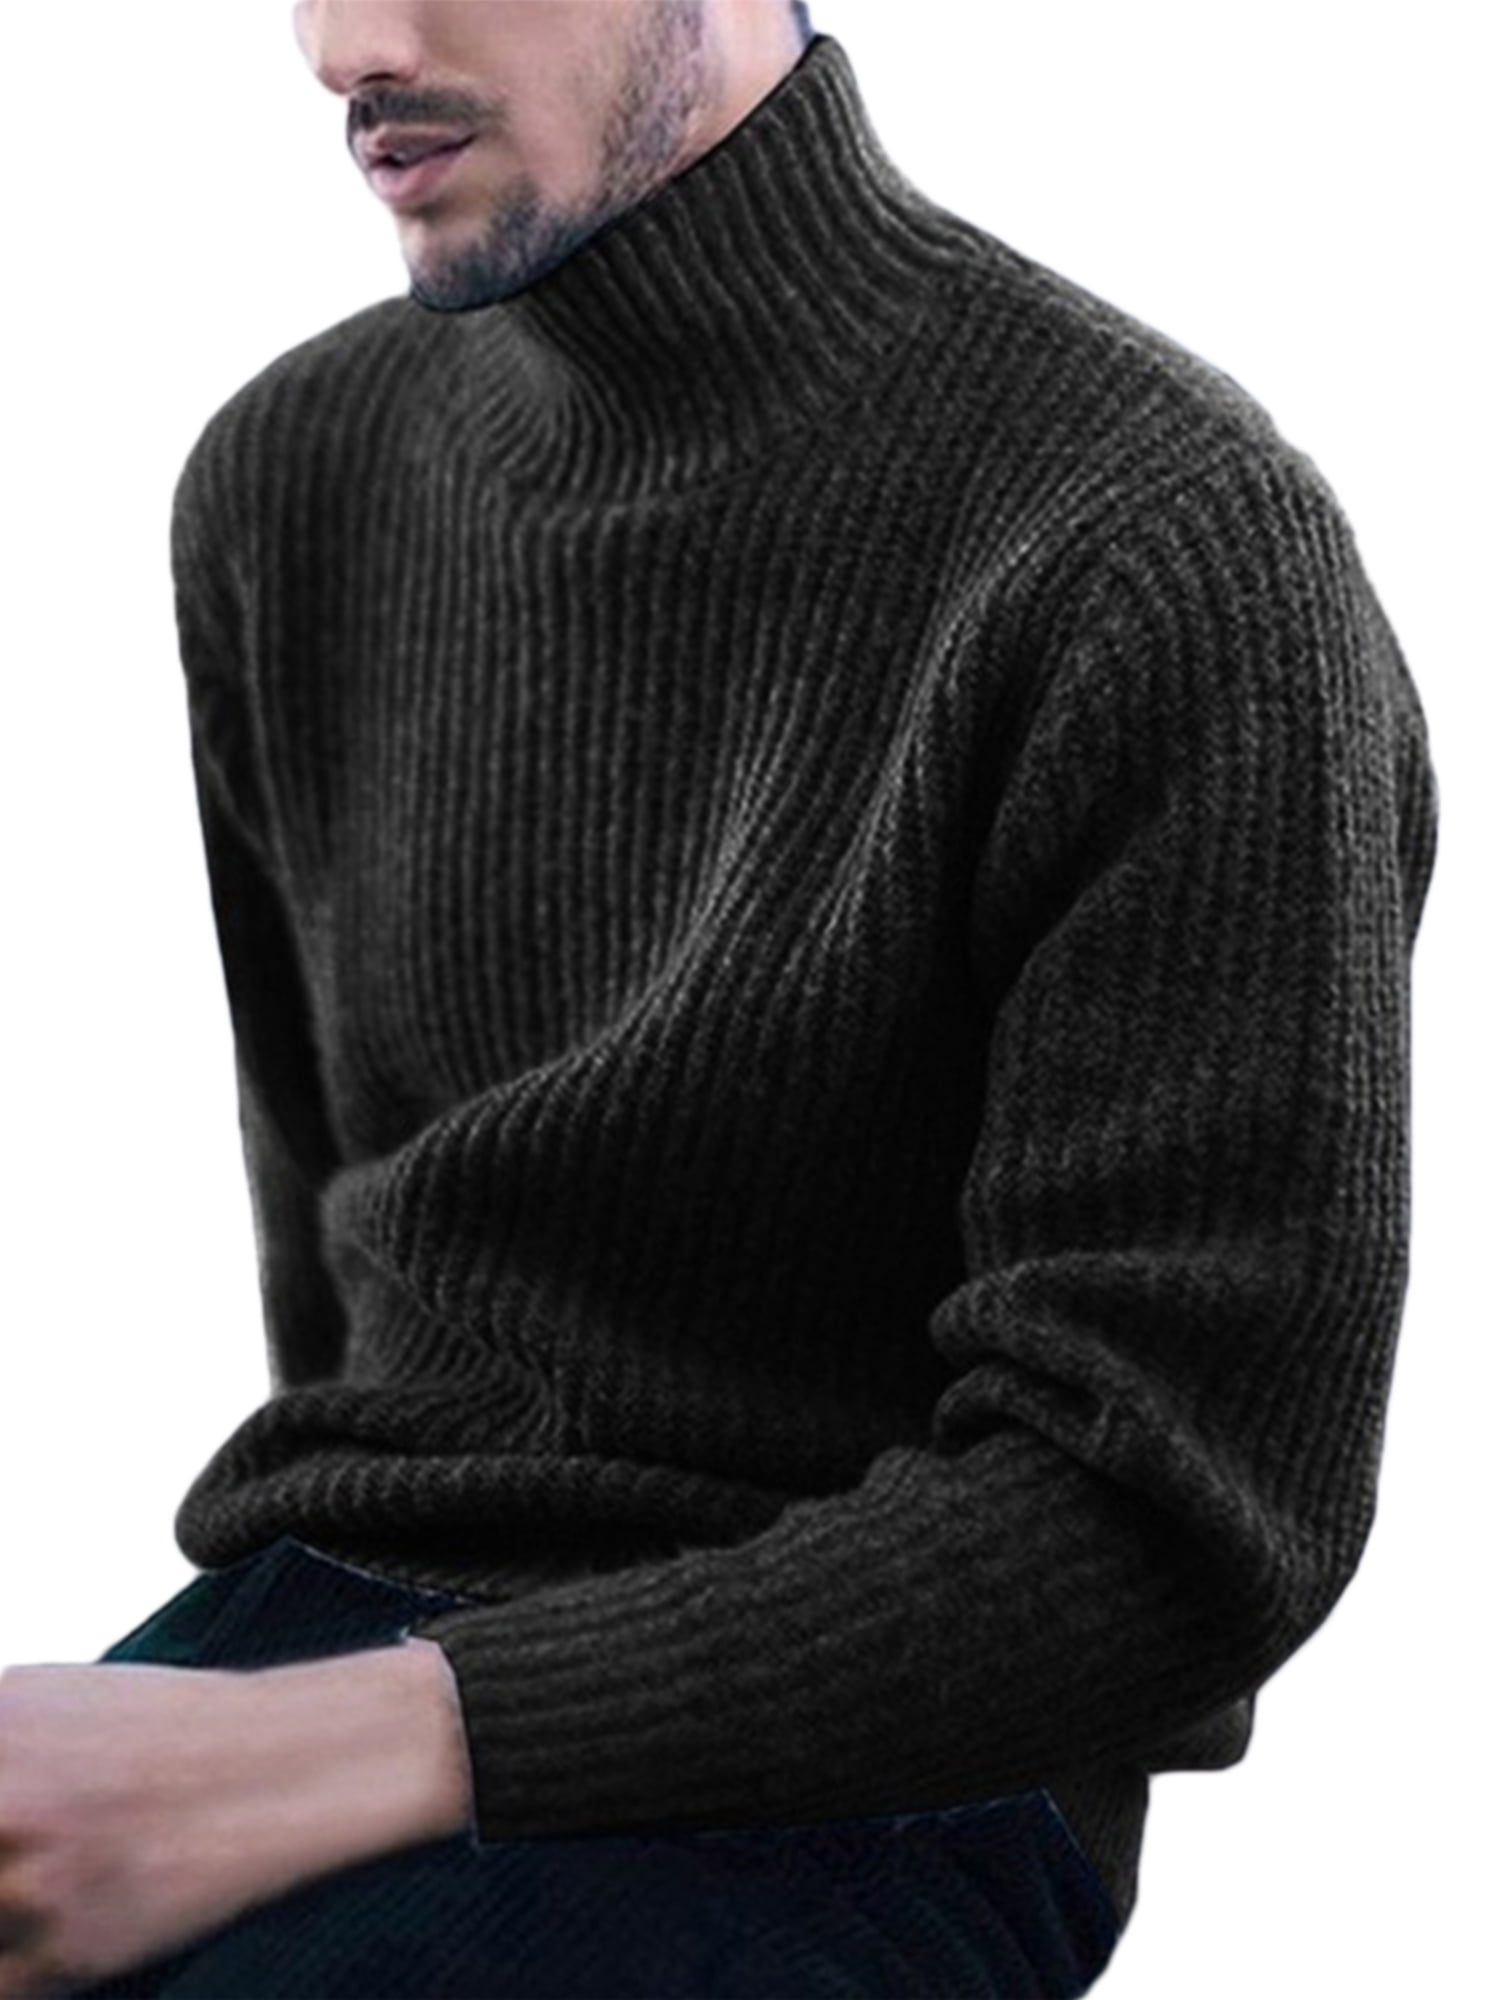 Men's Winter High Neck Turtleneck Warm Thicken Casual Knitting Tees Tops Sweater